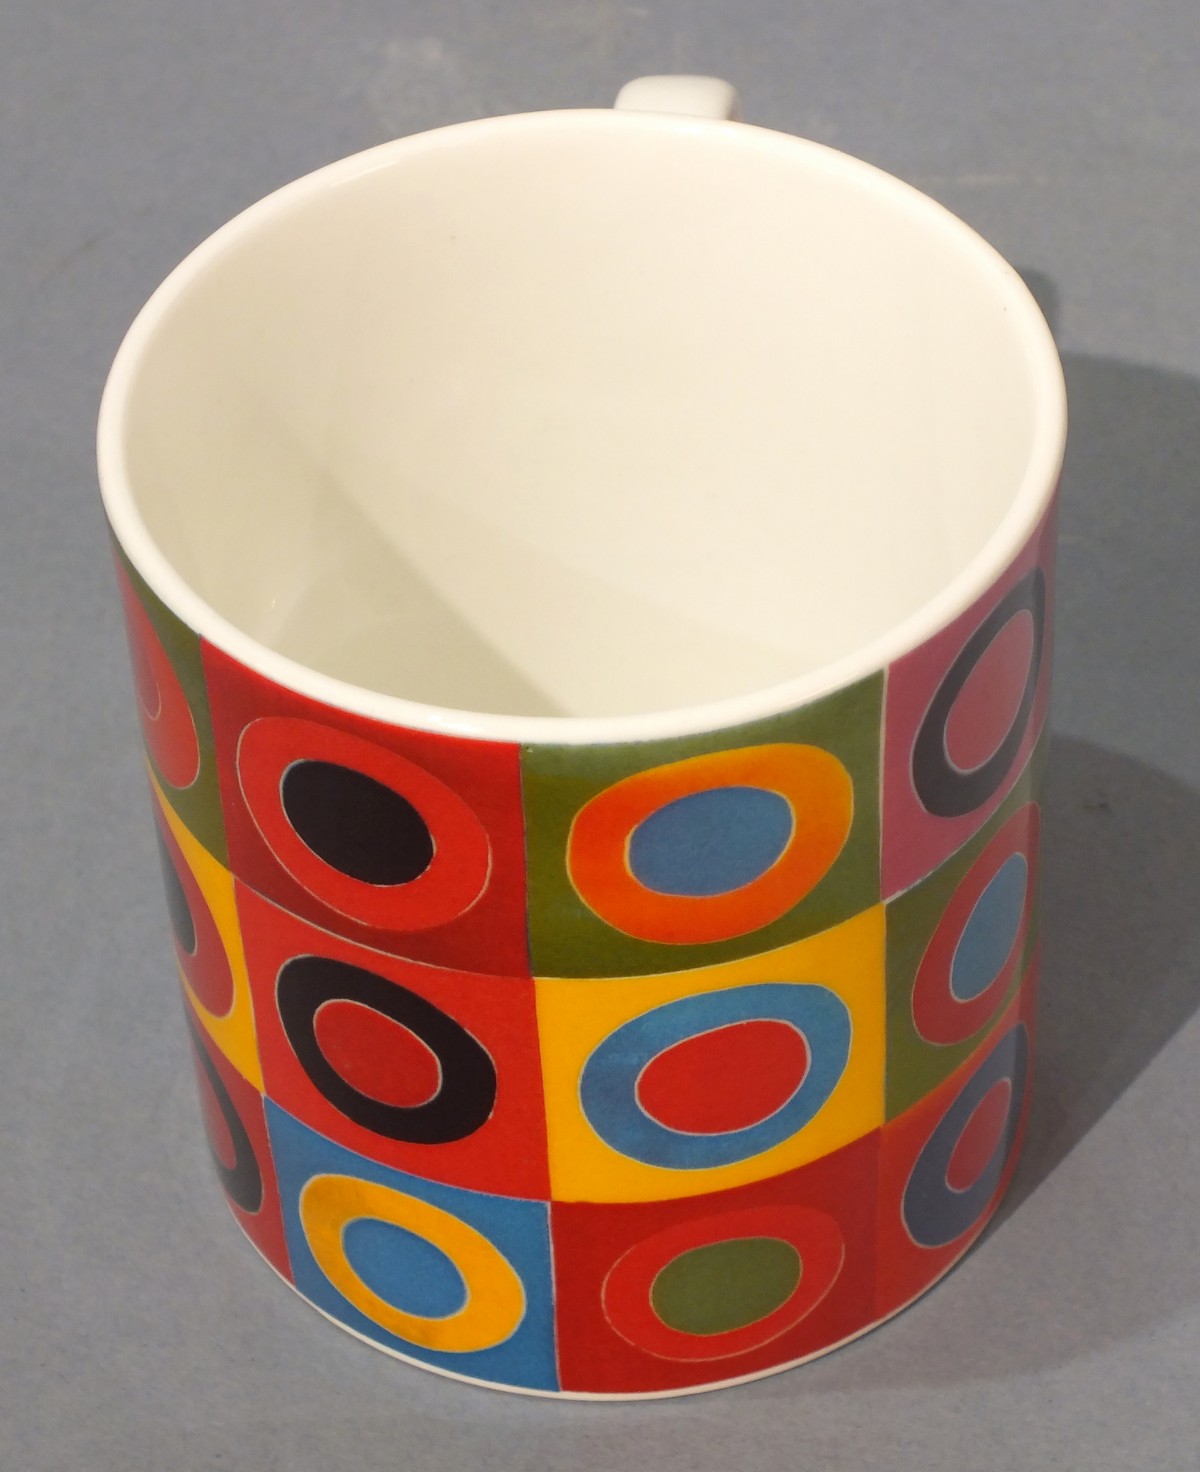 Sir Terry FROST (British 1915-2003) Orchard Tambourine Mug (on behalf of Royal Academy of Arts), - Image 3 of 10